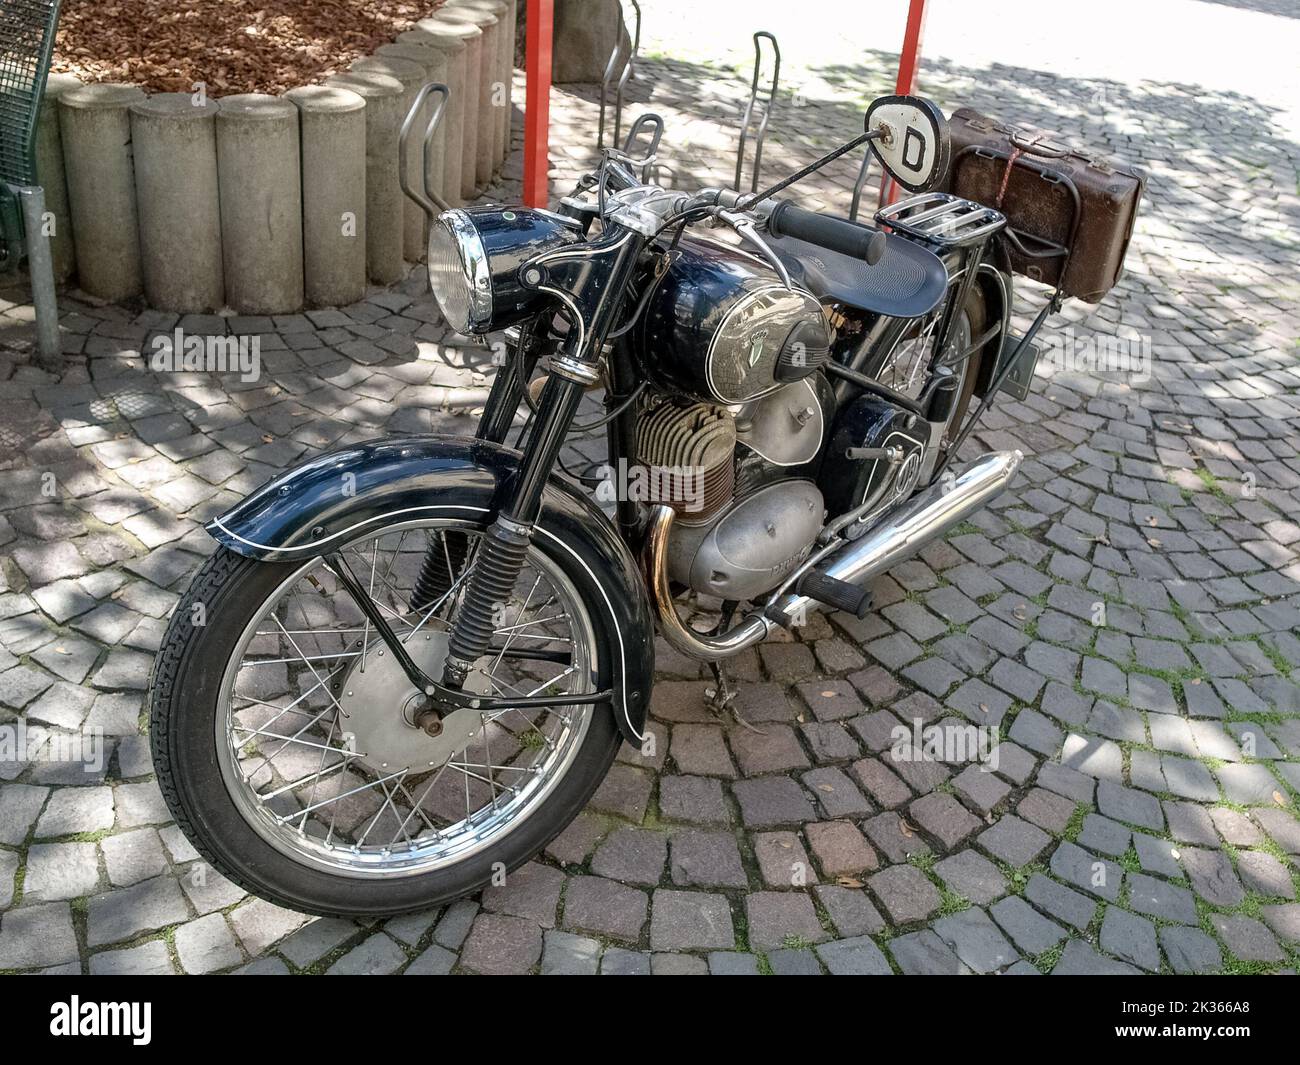 Auto Union DKW (Dampf-Kraft-Wagen) RT motorcycle oldtimer with leather suitcase standing in the old town of Linz am Rhein, Germany Stock Photo